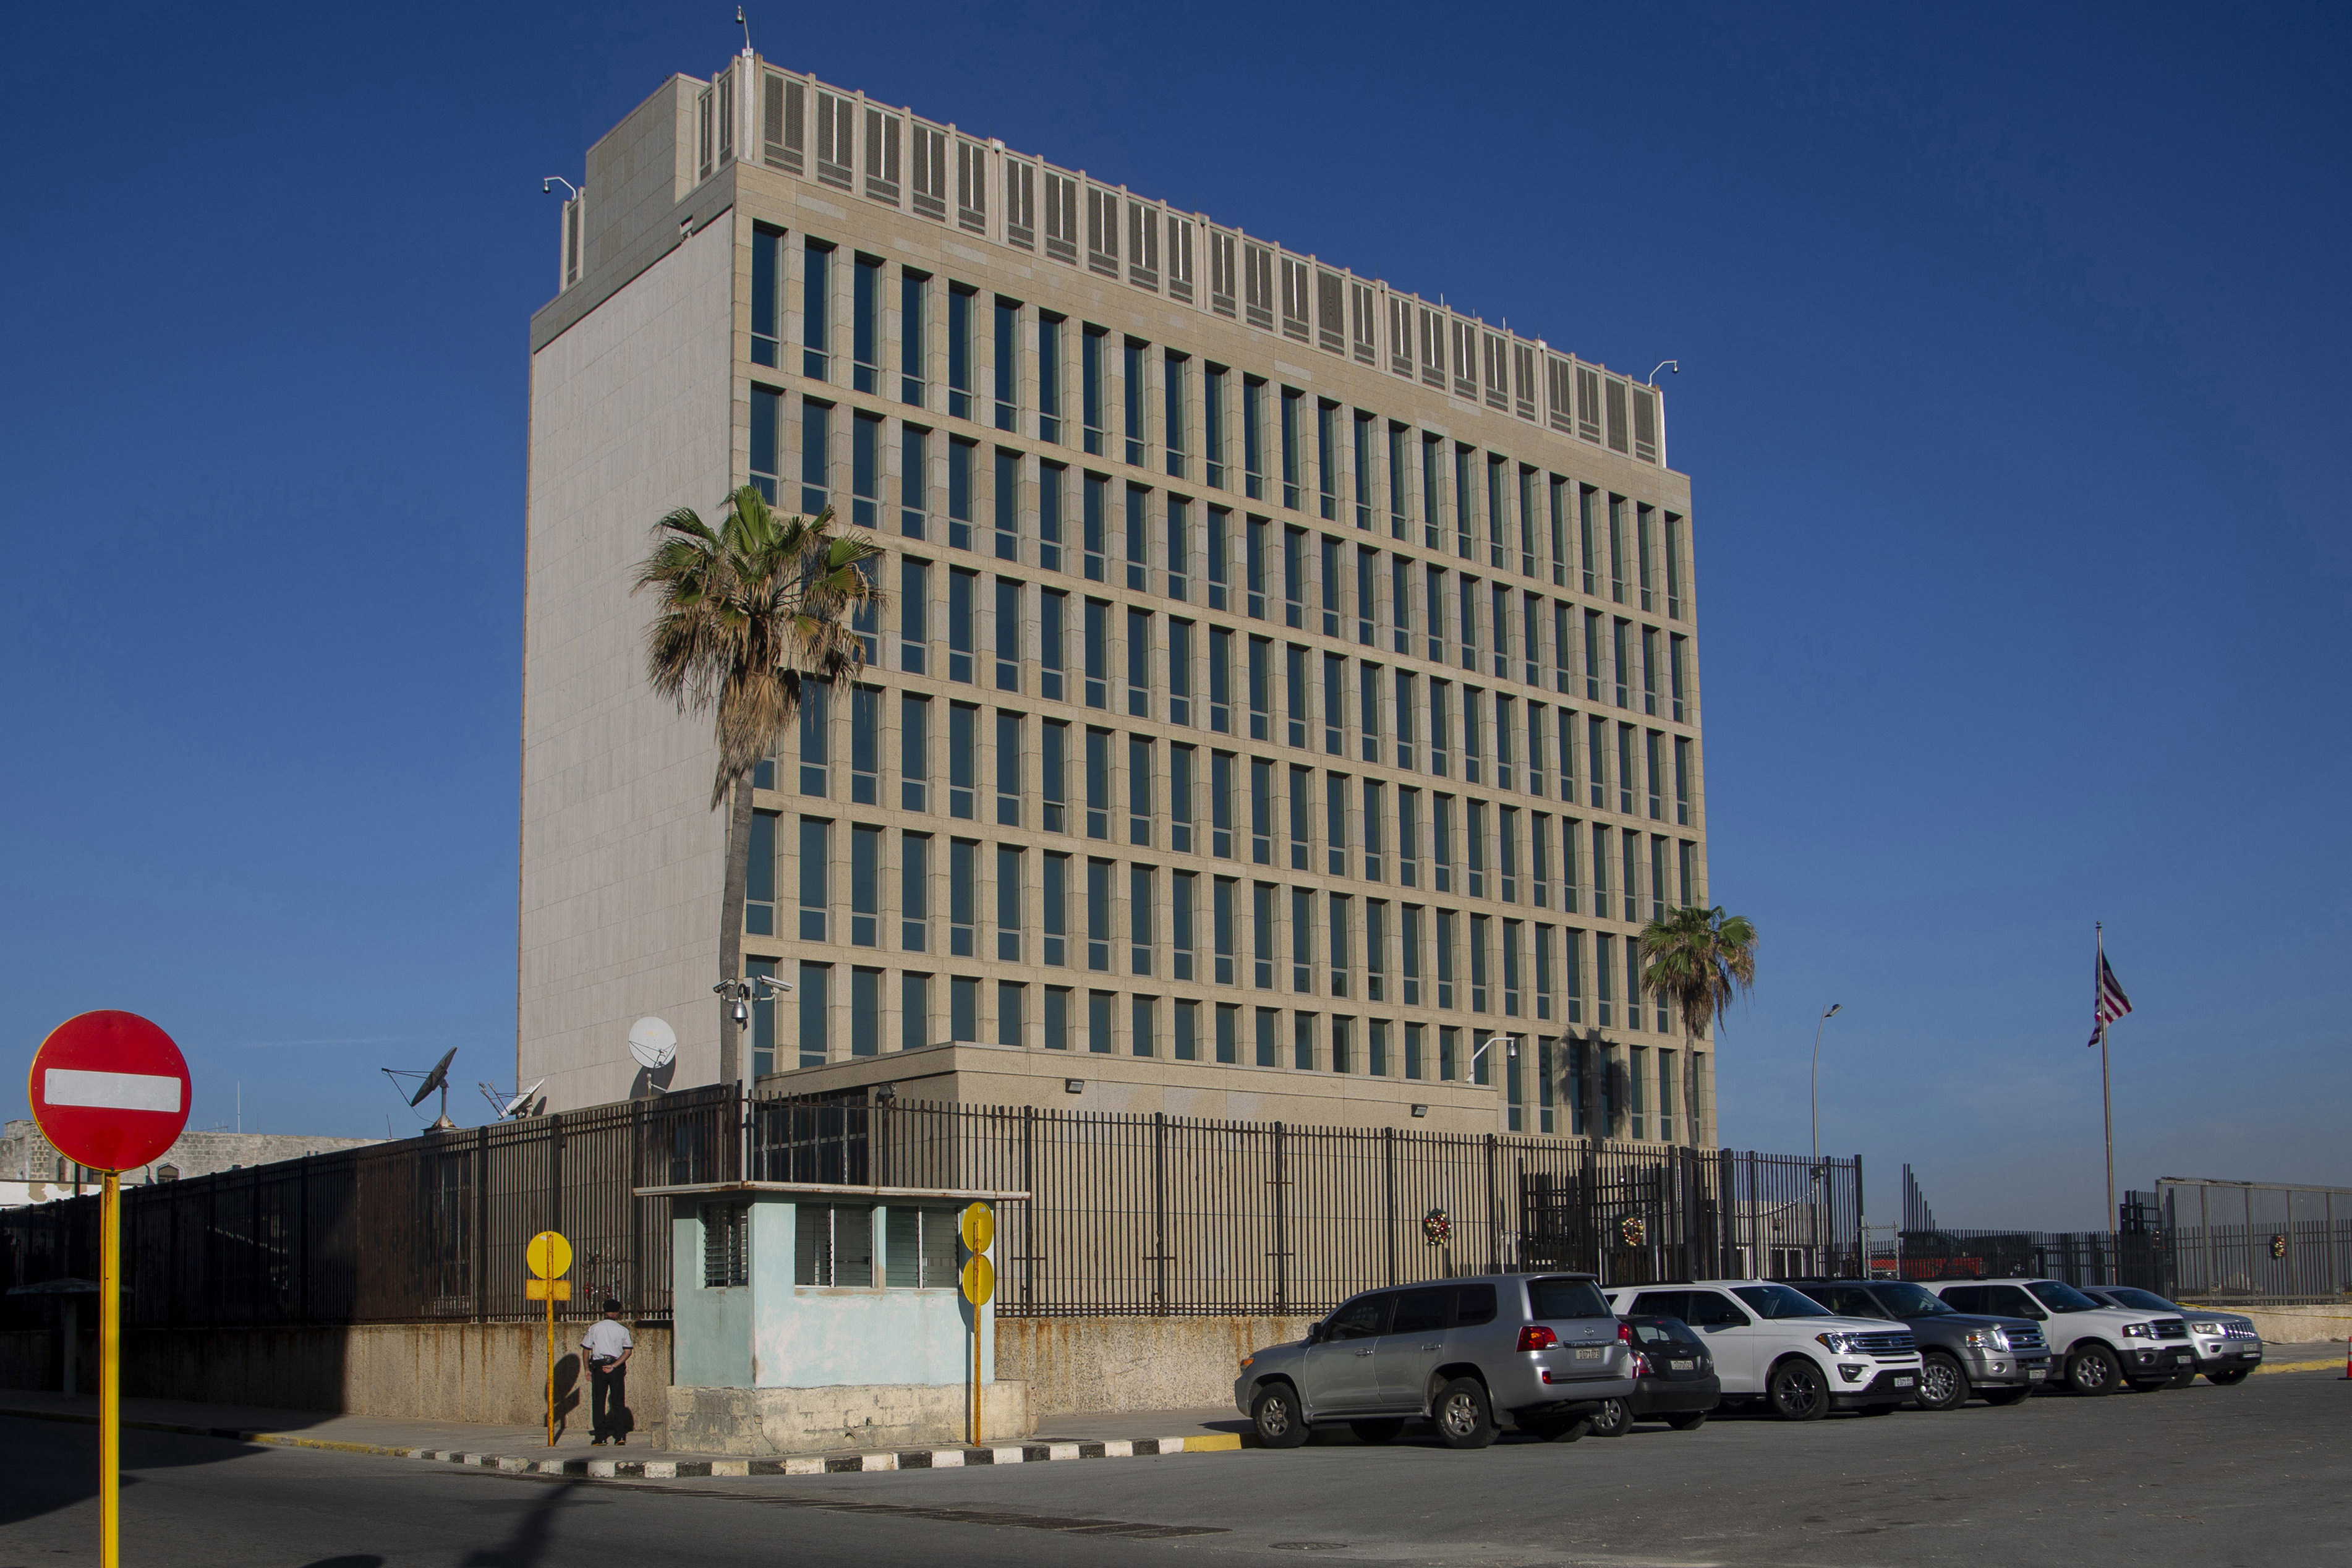 Symptoms of the mysterious ailment were first reported by US embassy officials in the Cuban capital Havana in 2016. File photo: AP